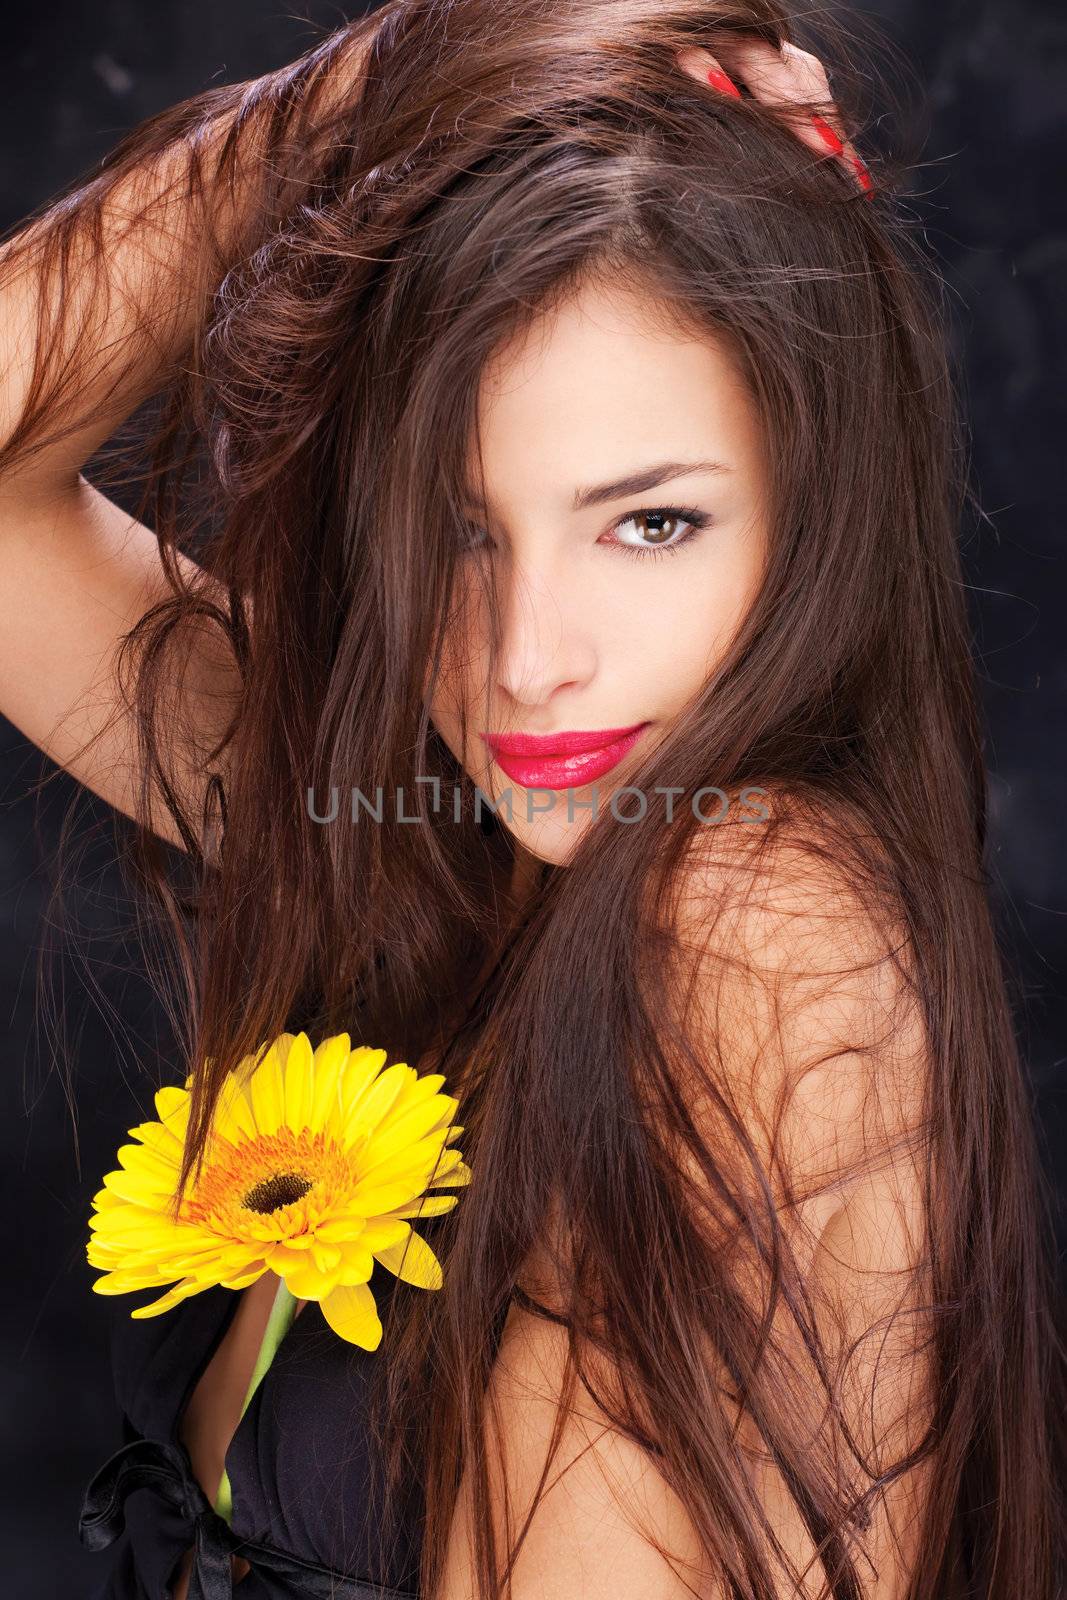 Pretty woman with long hair and yellow daisy